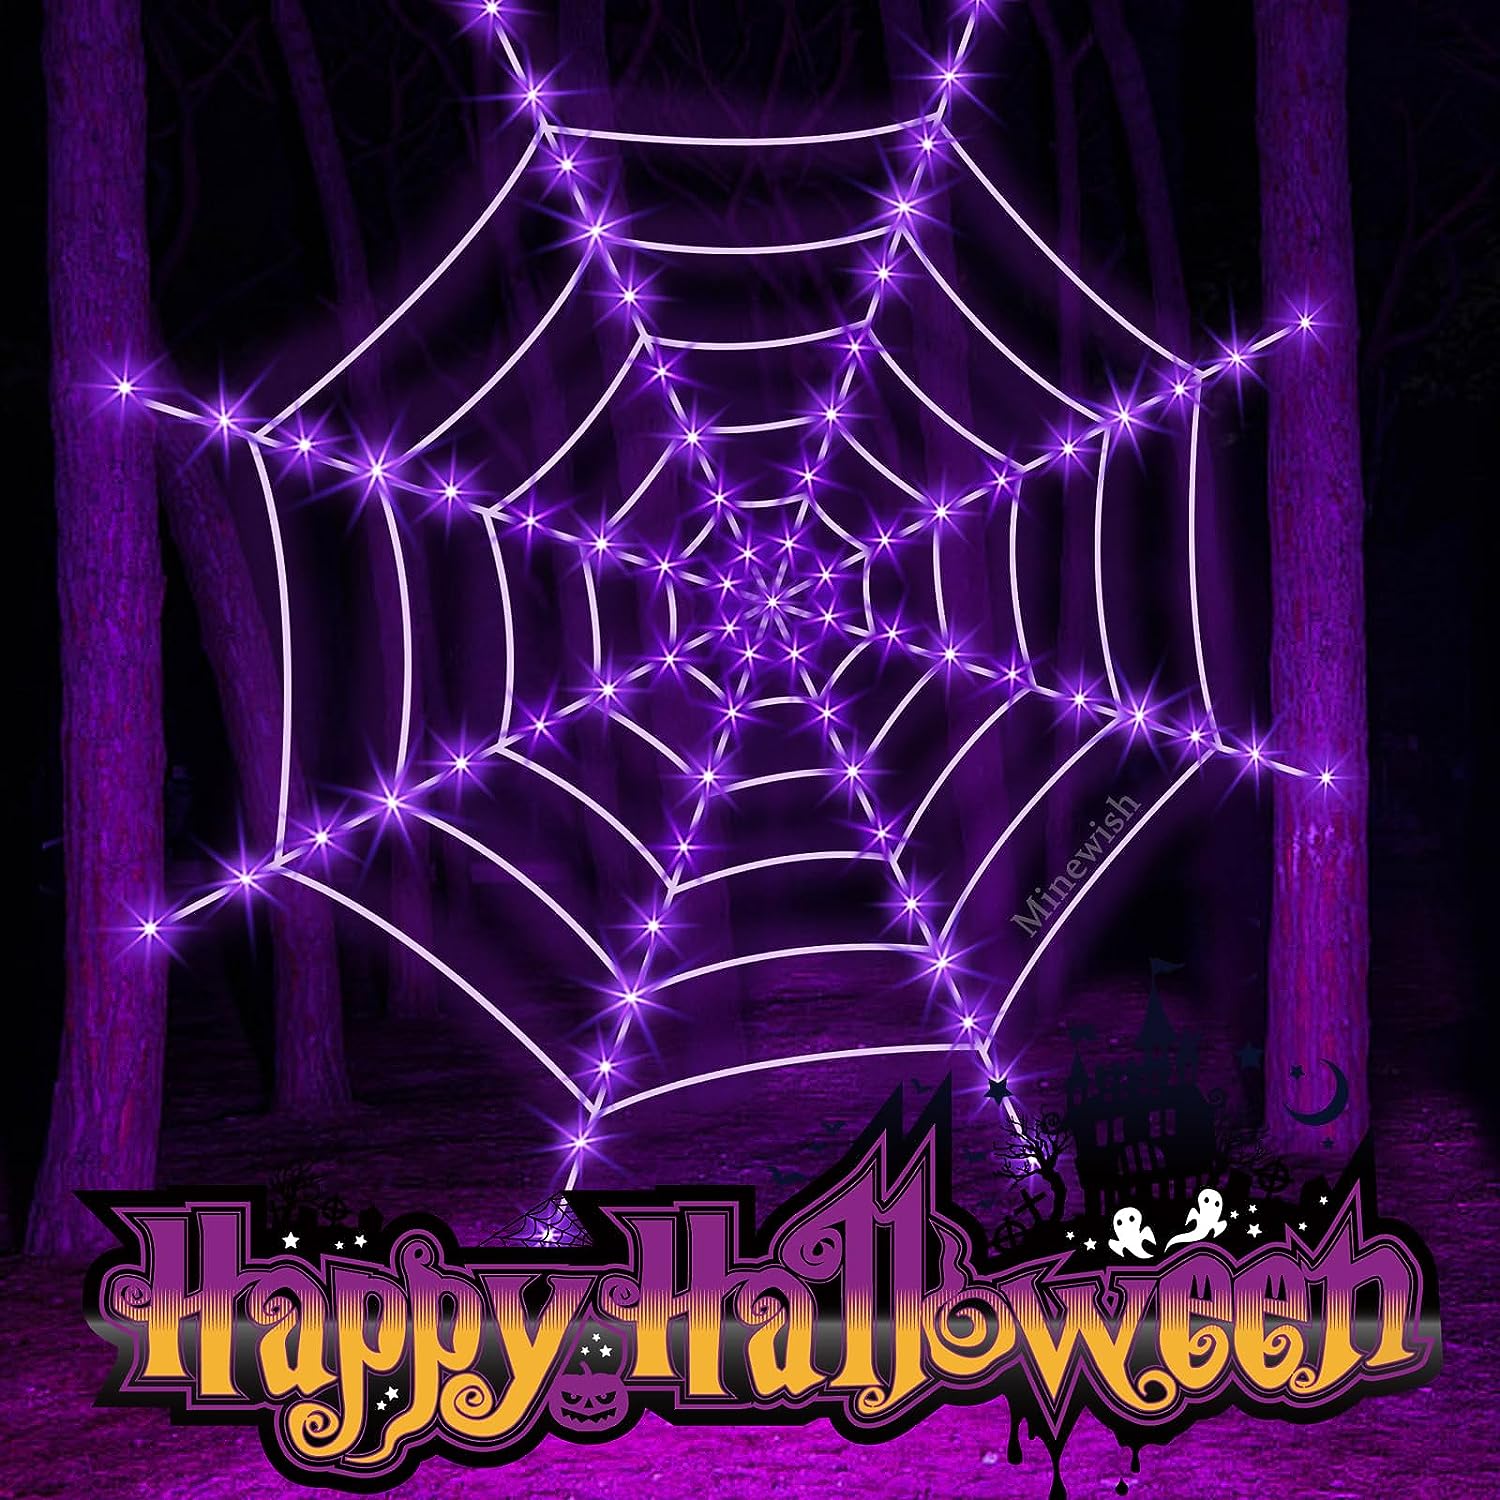 Halloween Decorations Spider Web Lights, 120 Purple LED Light Up 12 FT Giant Spiderweb Large Outdoor Lighted Decor Huge Cobweb String Lights Decorative for Party Indoor Outside House Porch Yard Garden